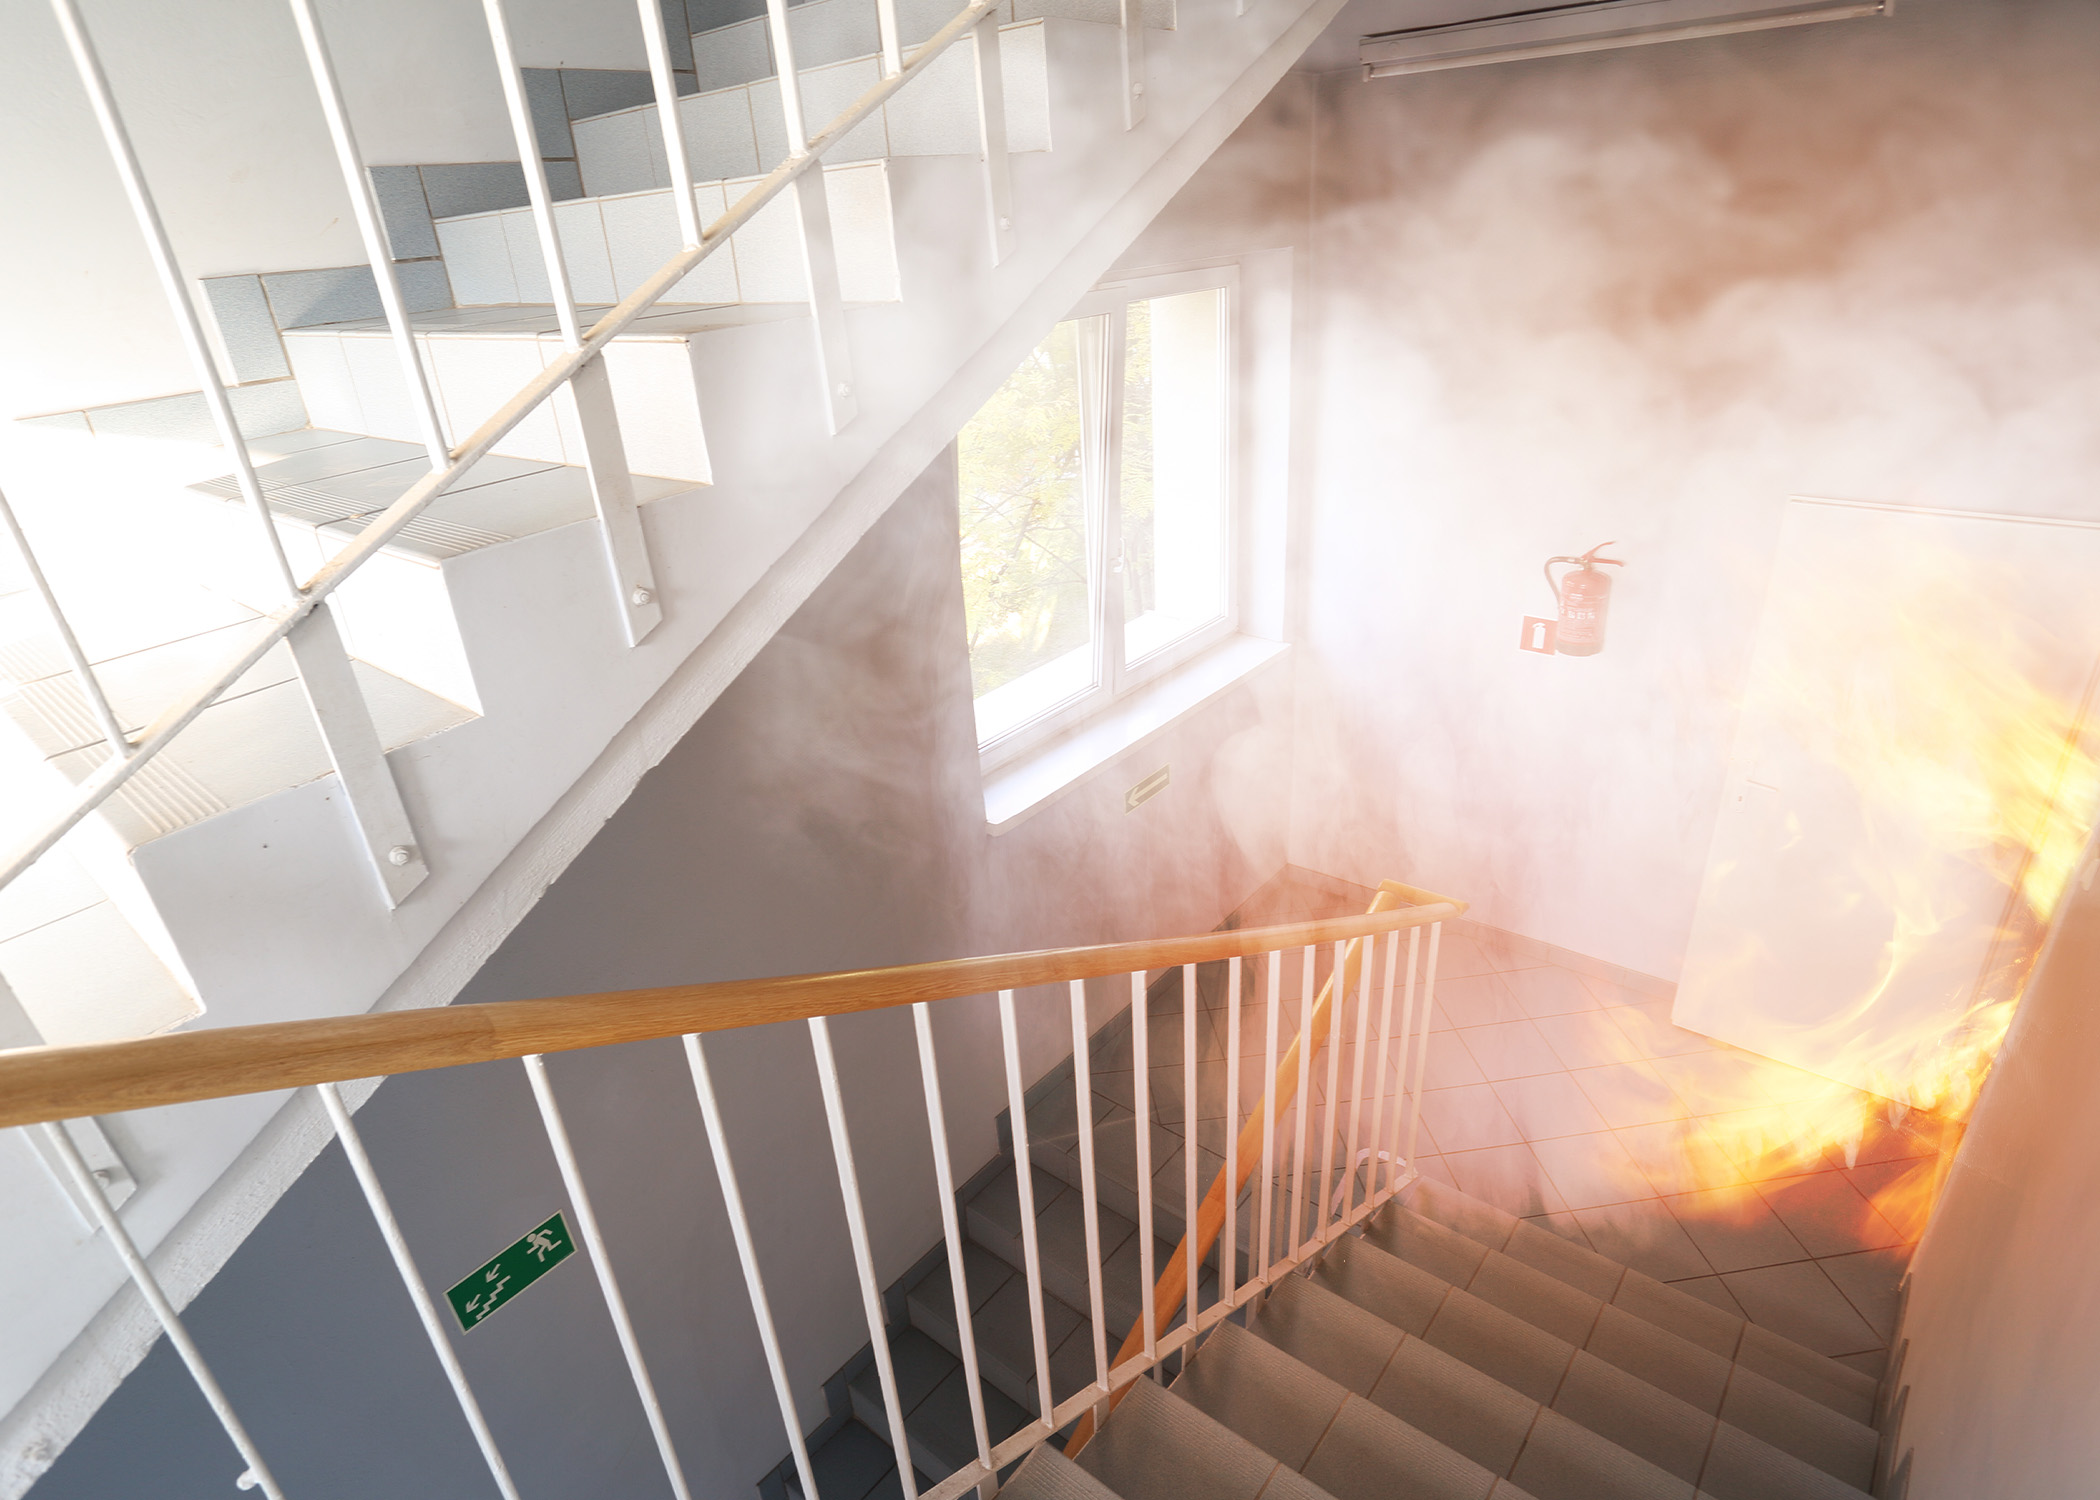 How Fire Risk Assessment Can Safeguard Your Property and Employees